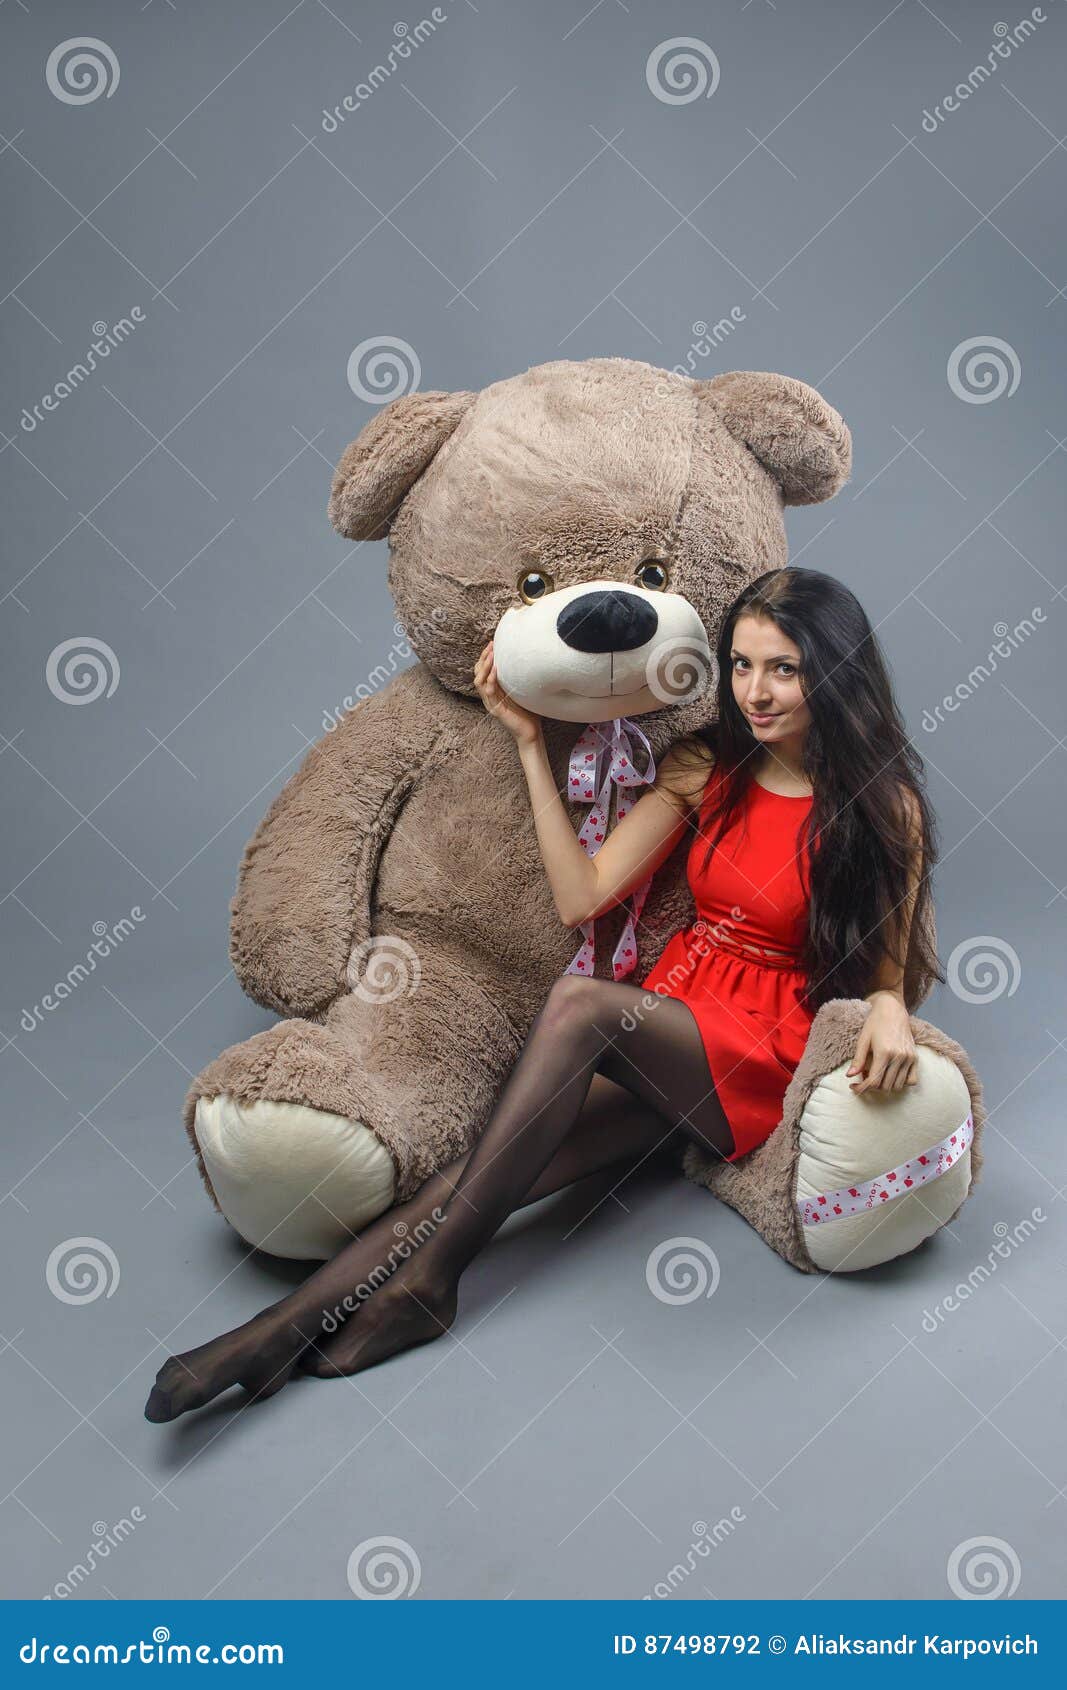 Young Beautiful Girl in Red Dress with Big Teddy Bear Soft Toy ...